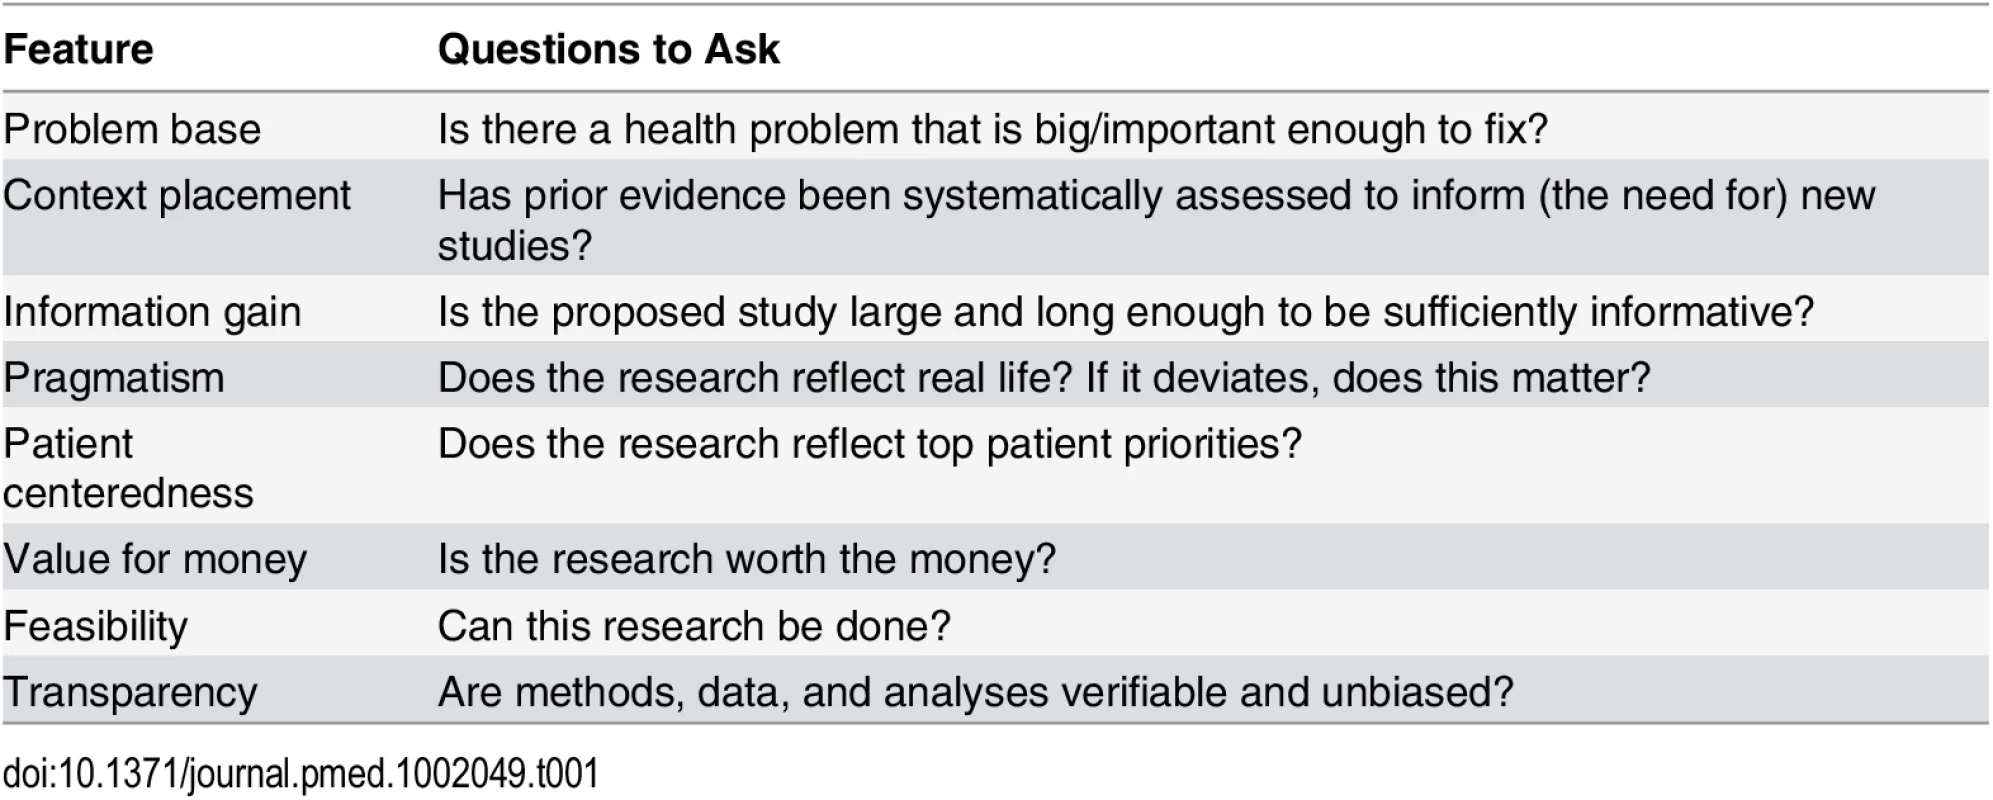 Features to consider in appraising whether clinical research is useful.